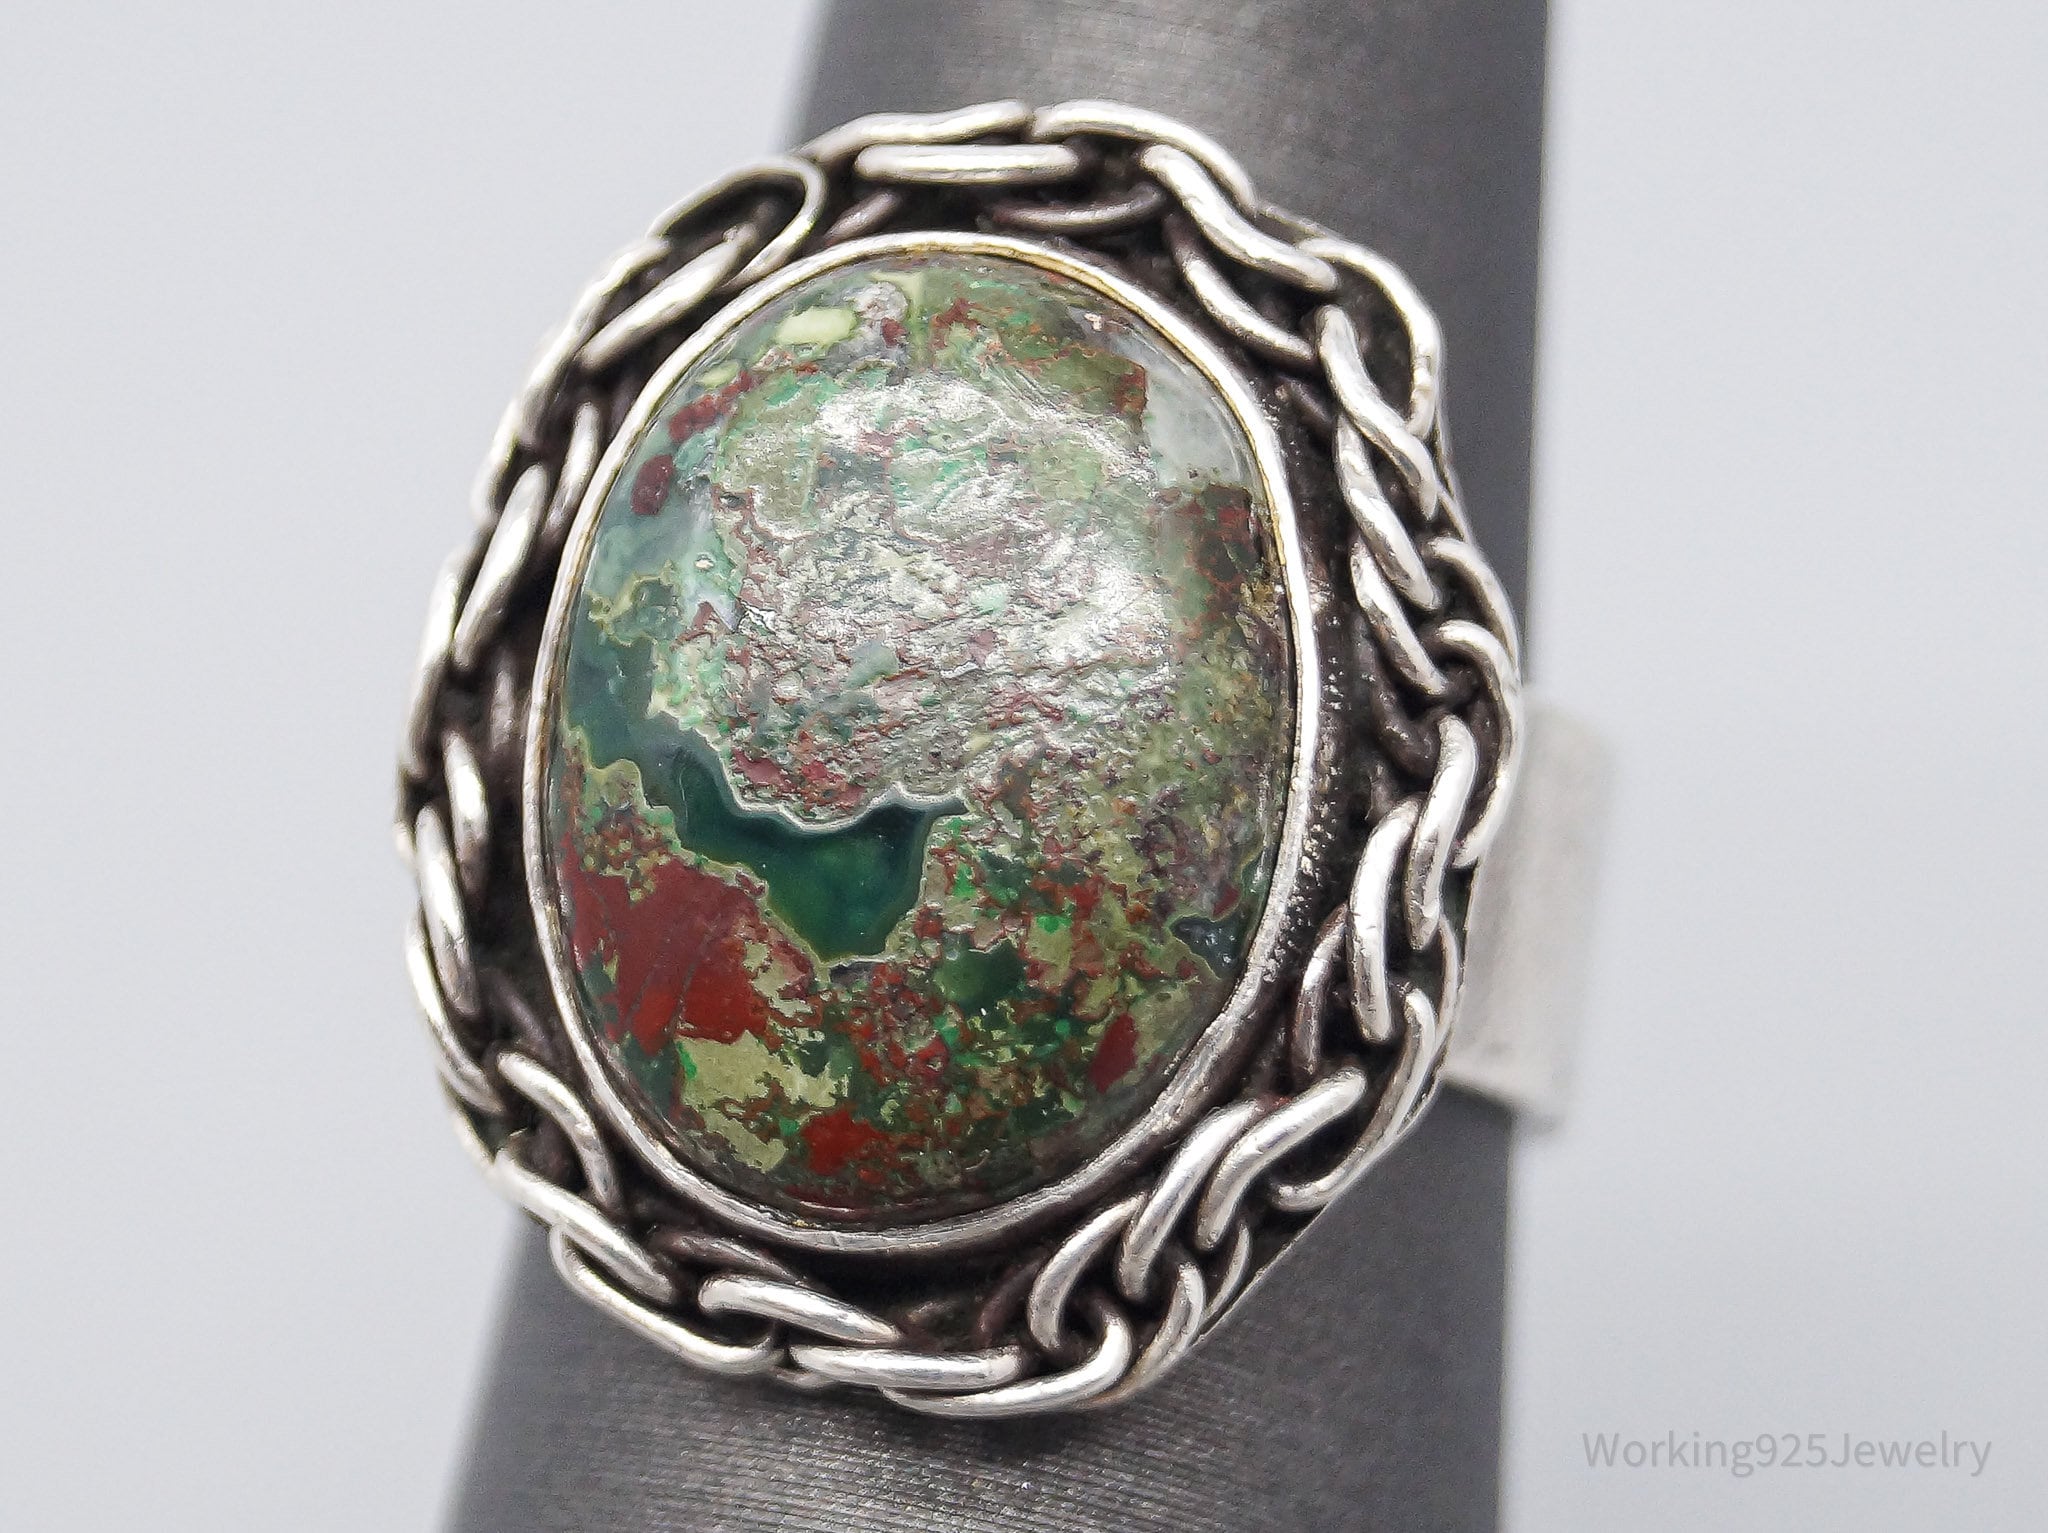 Vintage Red Green Jasper Silver Ring - Size 5